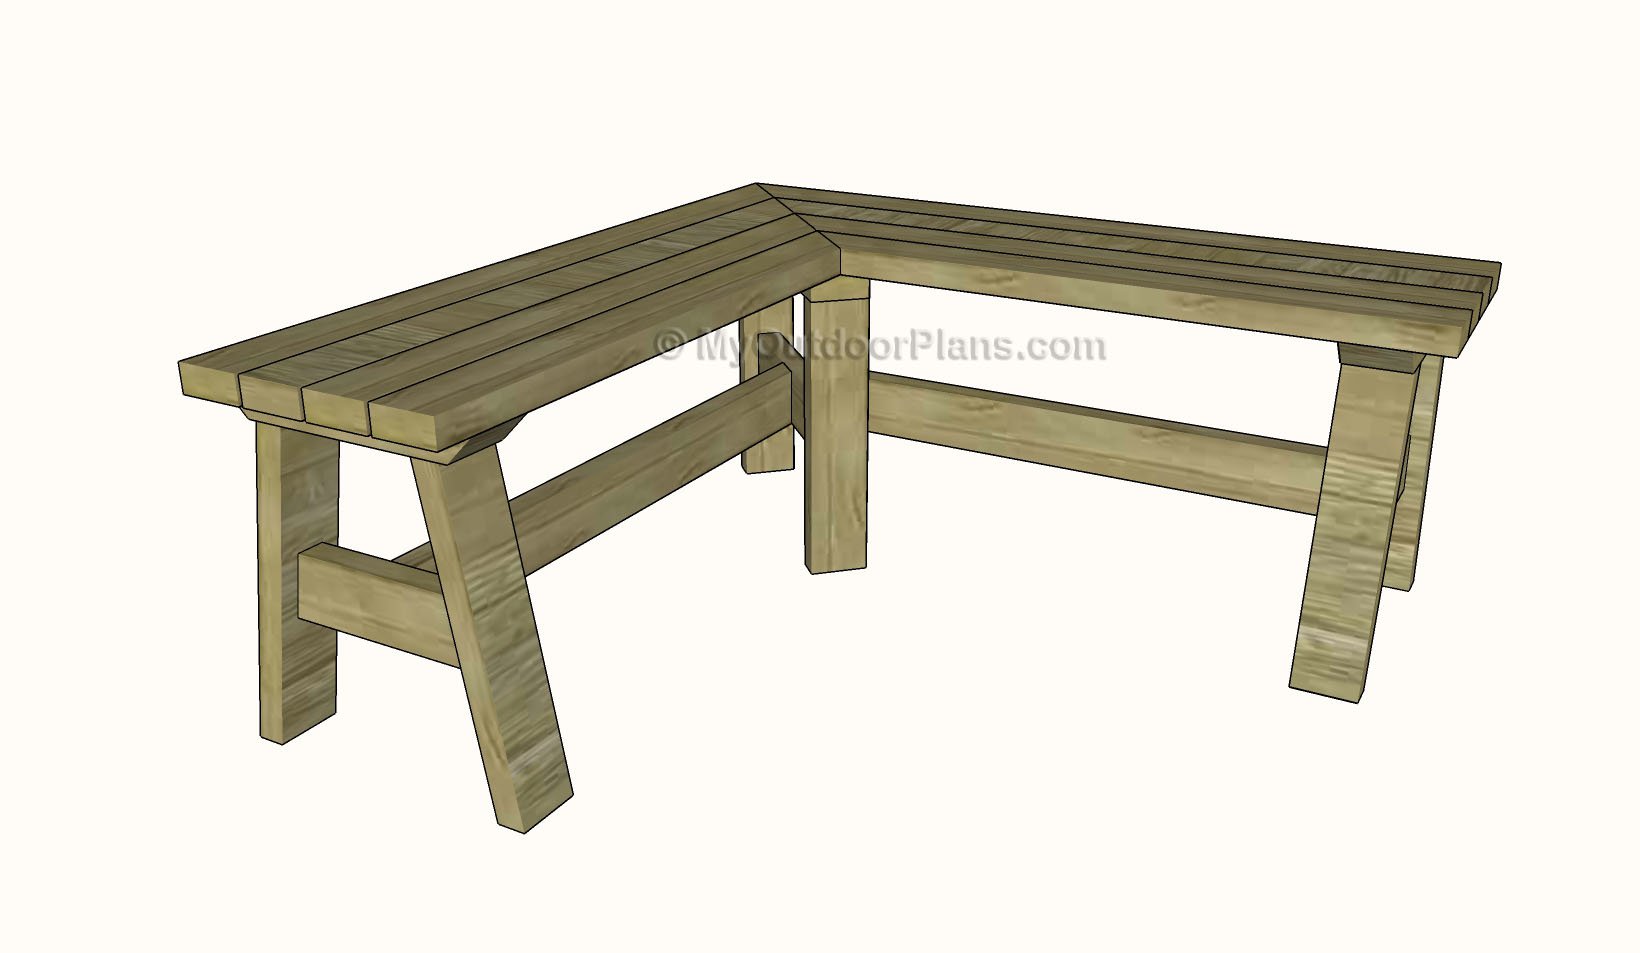 Corner Bench Plans | Free Outdoor Plans - DIY Shed, Wooden Playhouse 